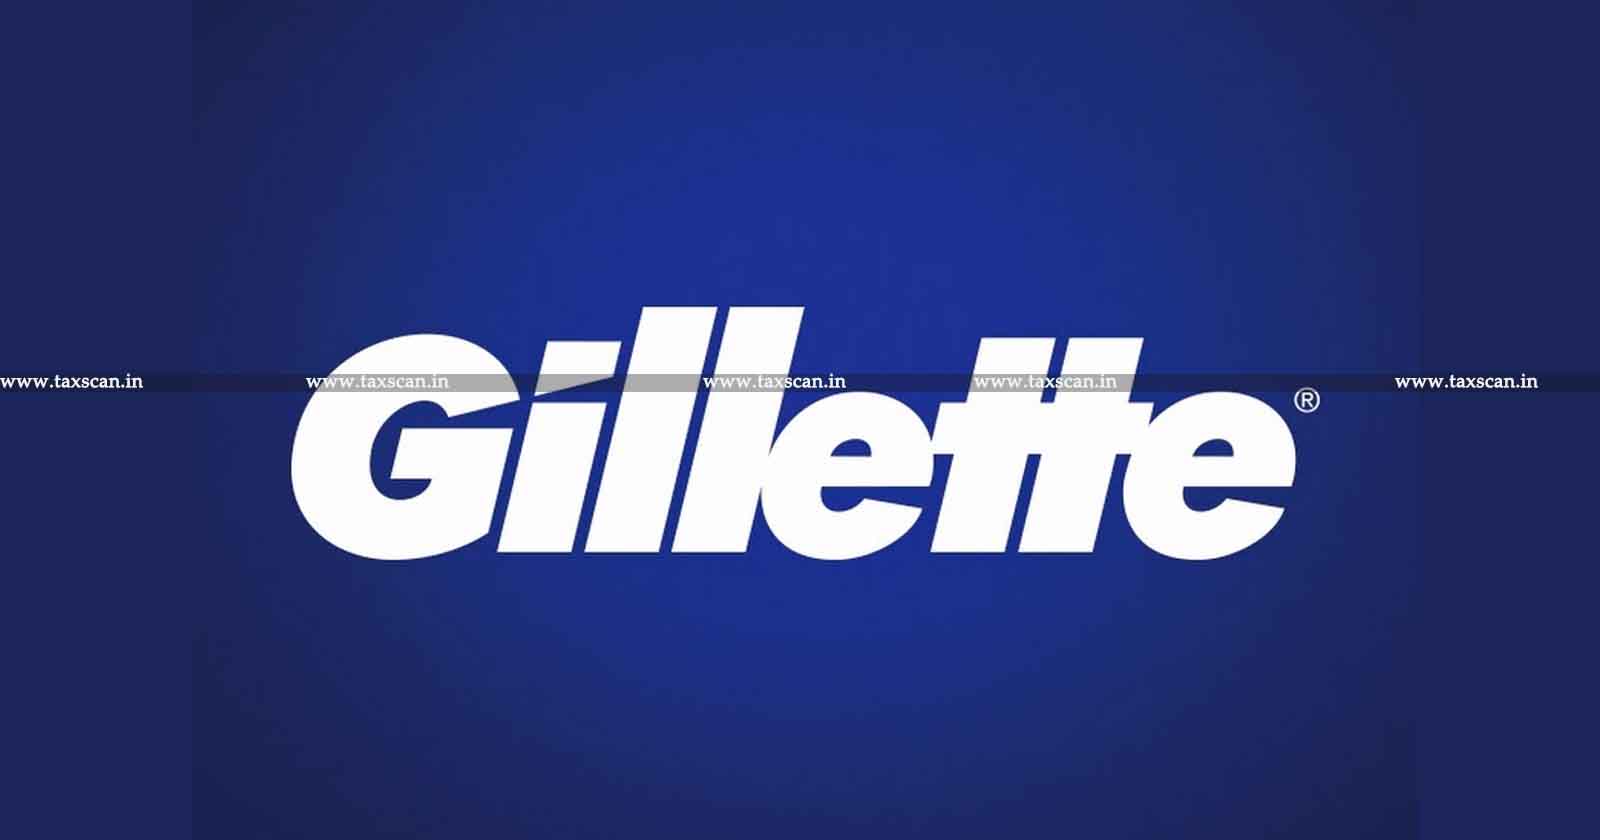 debts - Income Tax Addition - Income Tax - SC - Gillette India - SC rules in favour of Gillette India - taxscan